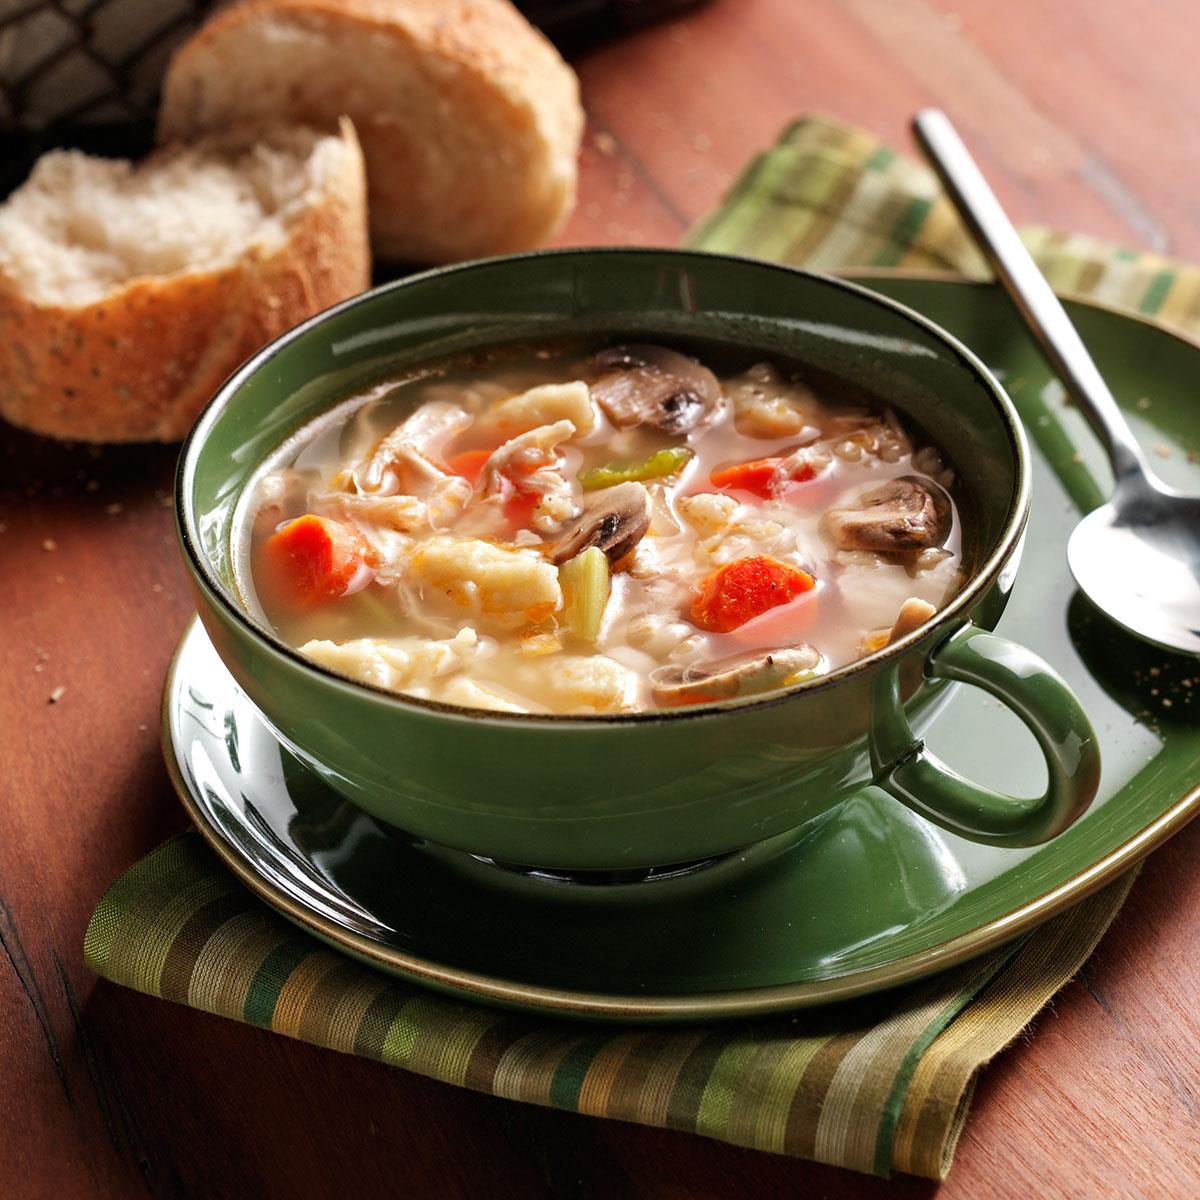 Chicken Soup with Spaetzle